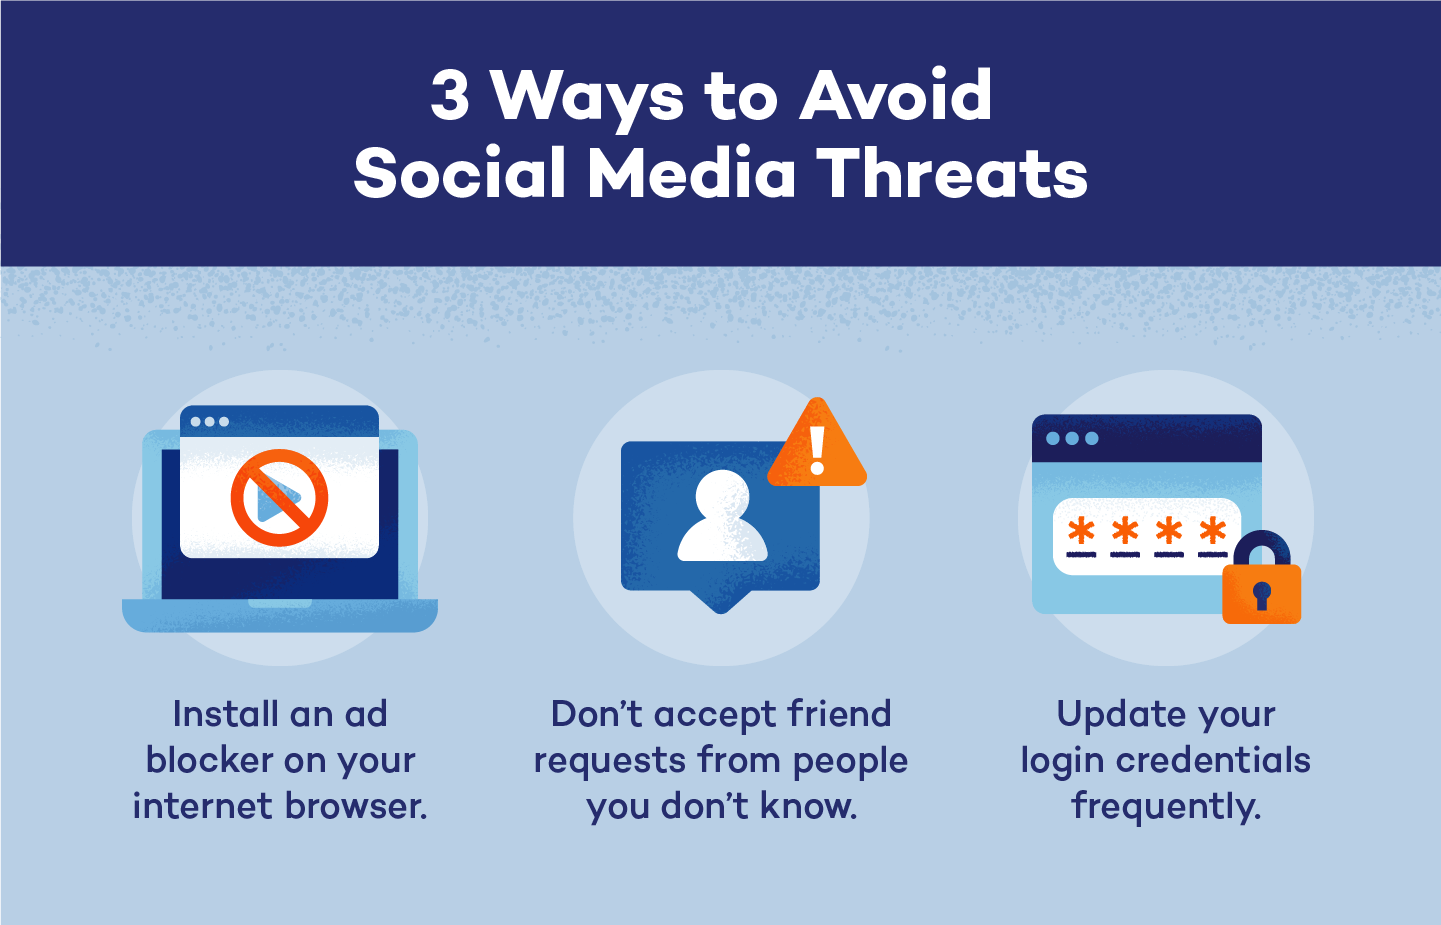 Ad blockers, login credentials, and social media knowledge can help you avoid social media threats.